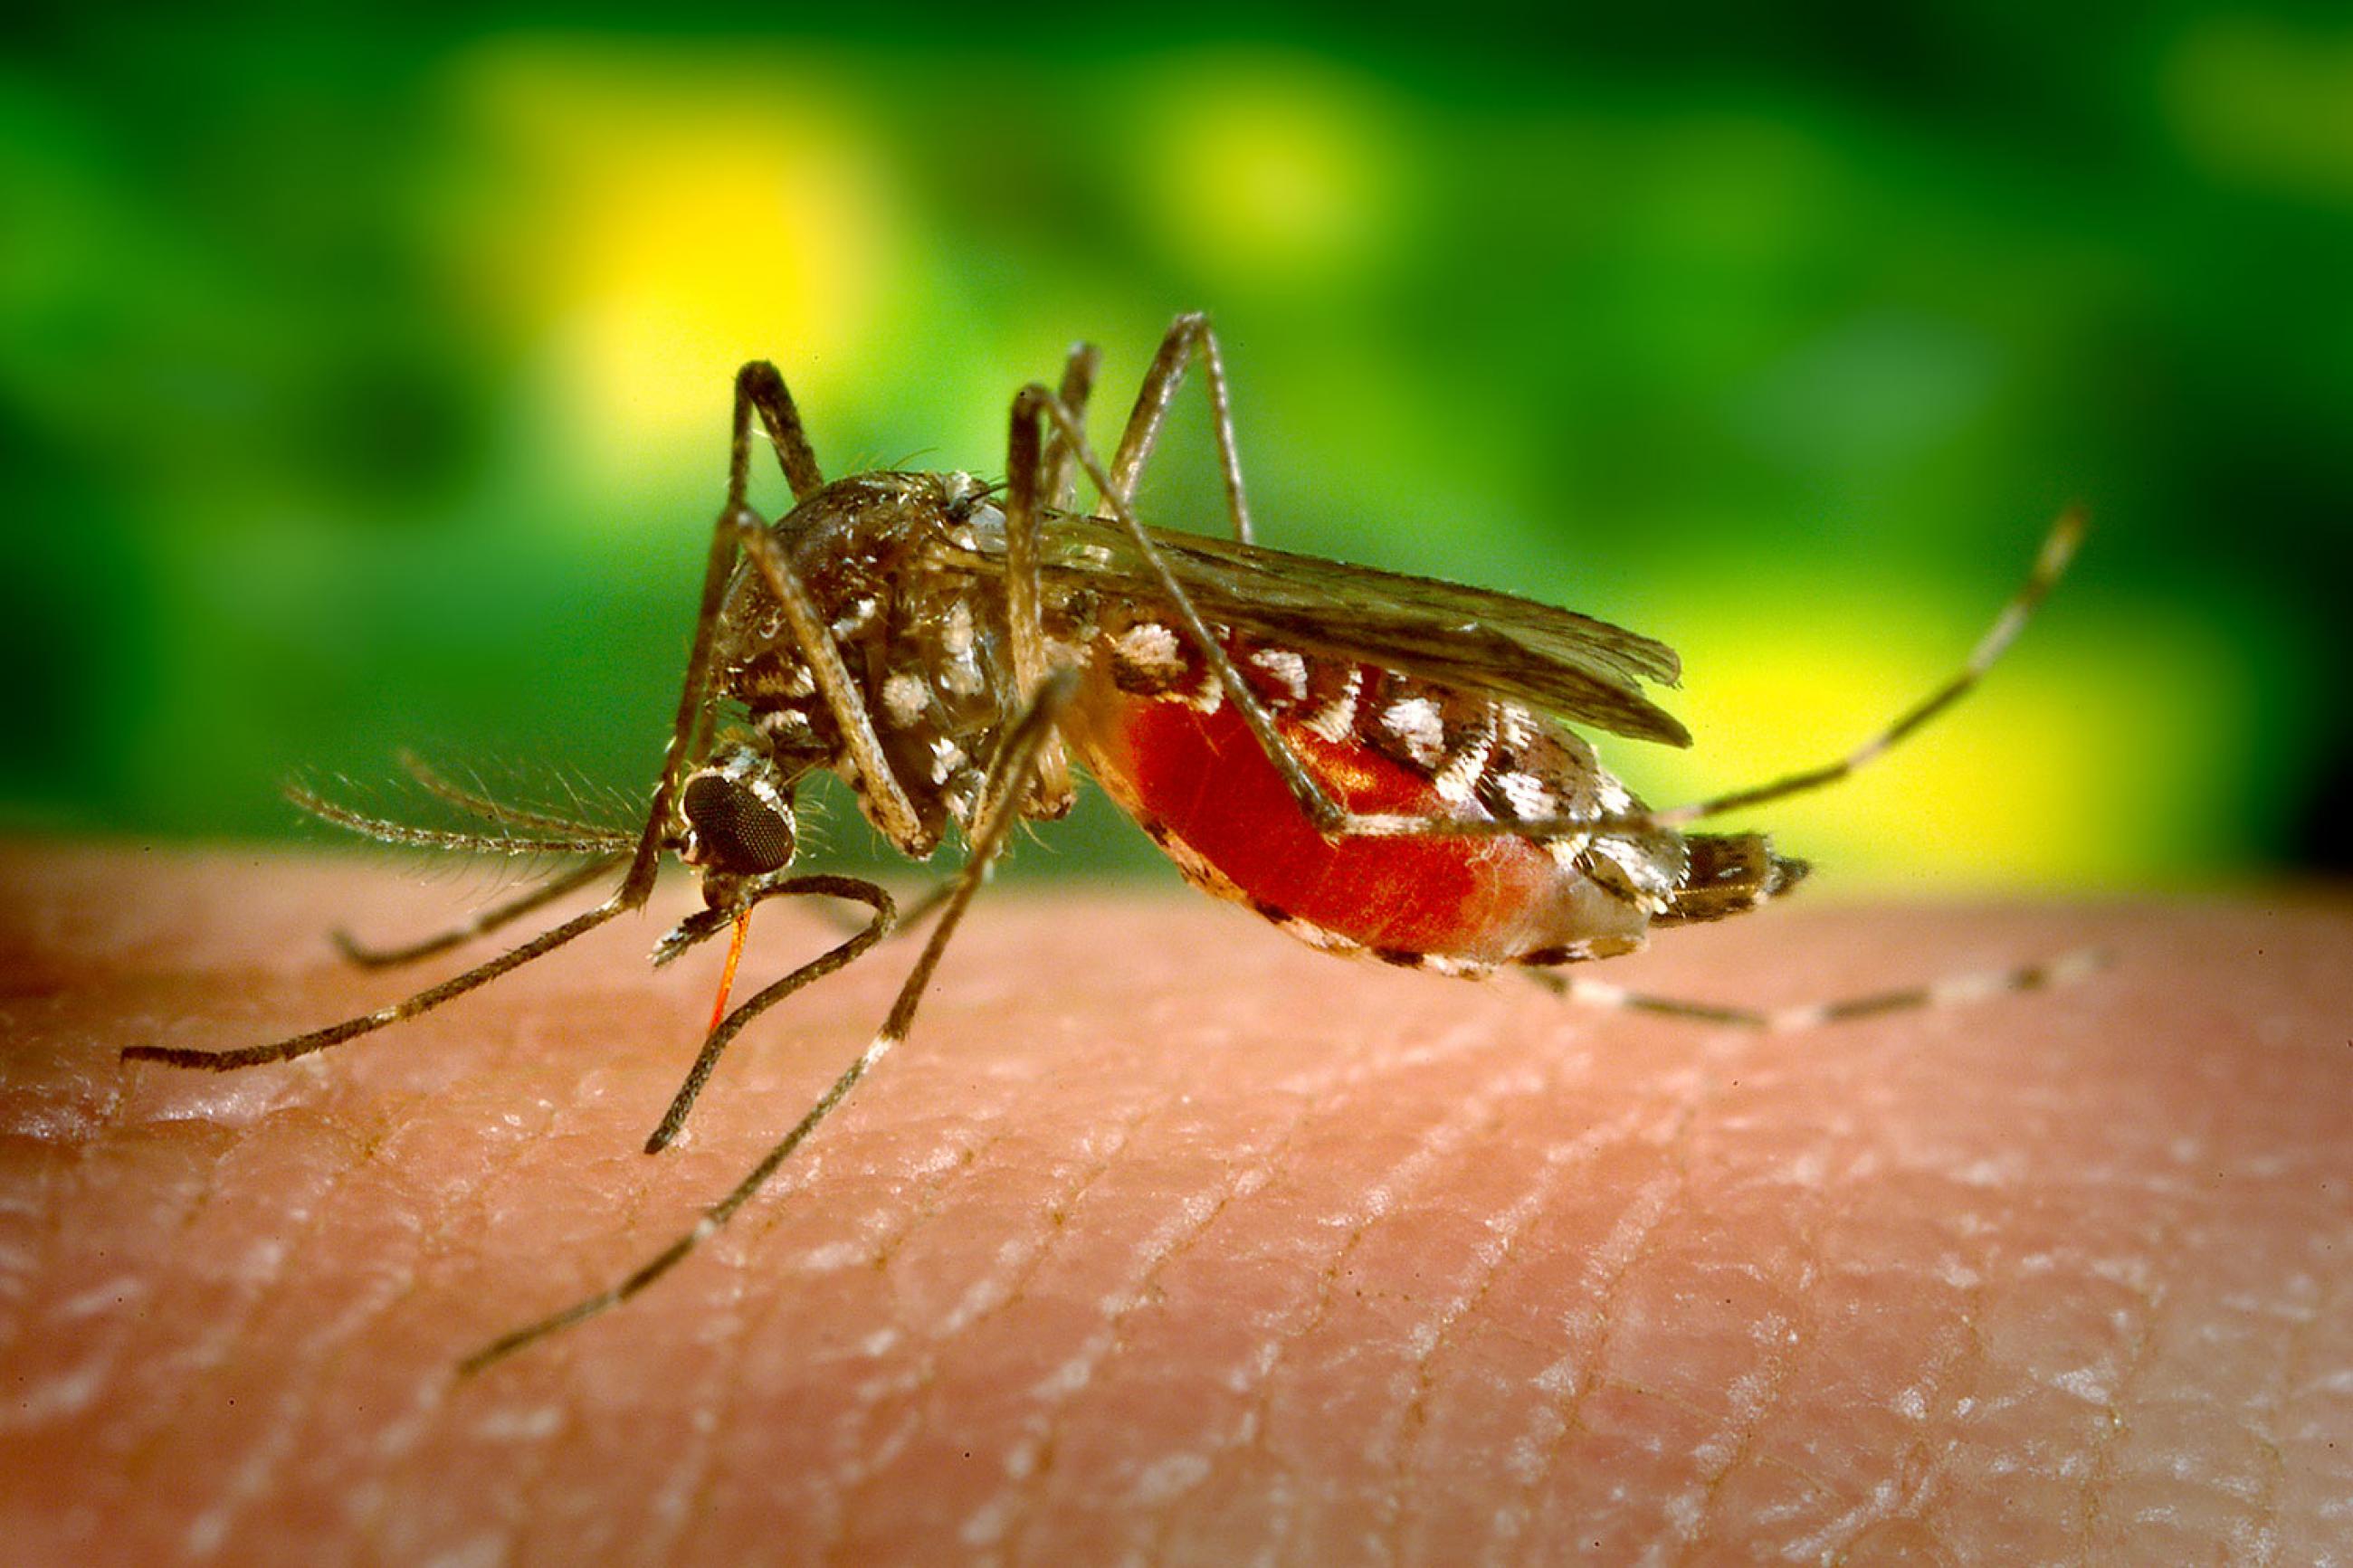 This 2005 photograph depicts a female Aedes aegypti mosquito, the primary vector for the spread of Dengue fever. The photo is a close-up of a mosquito taking a blood meal, making its belly bright red and striking against a bokeh green background